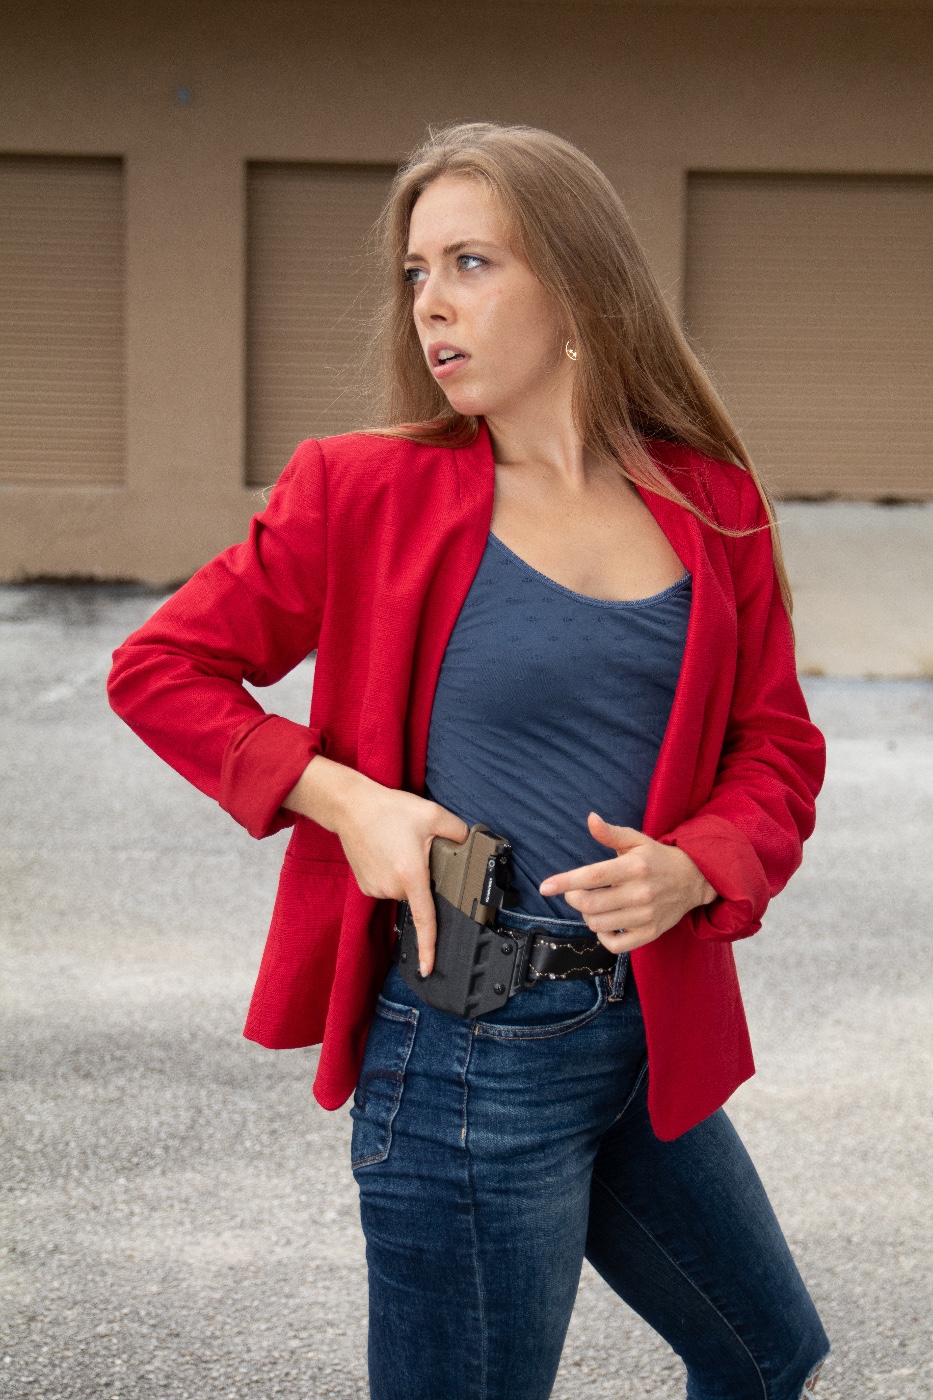 This photo is of a woman drawing a Springfield Hellcat OSP from a CCW holster. The woman is wearing denim blue jeans, a pullover blouse and a red suit jacket. She is also wearing a black leather belt. The strong side outside the waistband holster is made of Kydex.